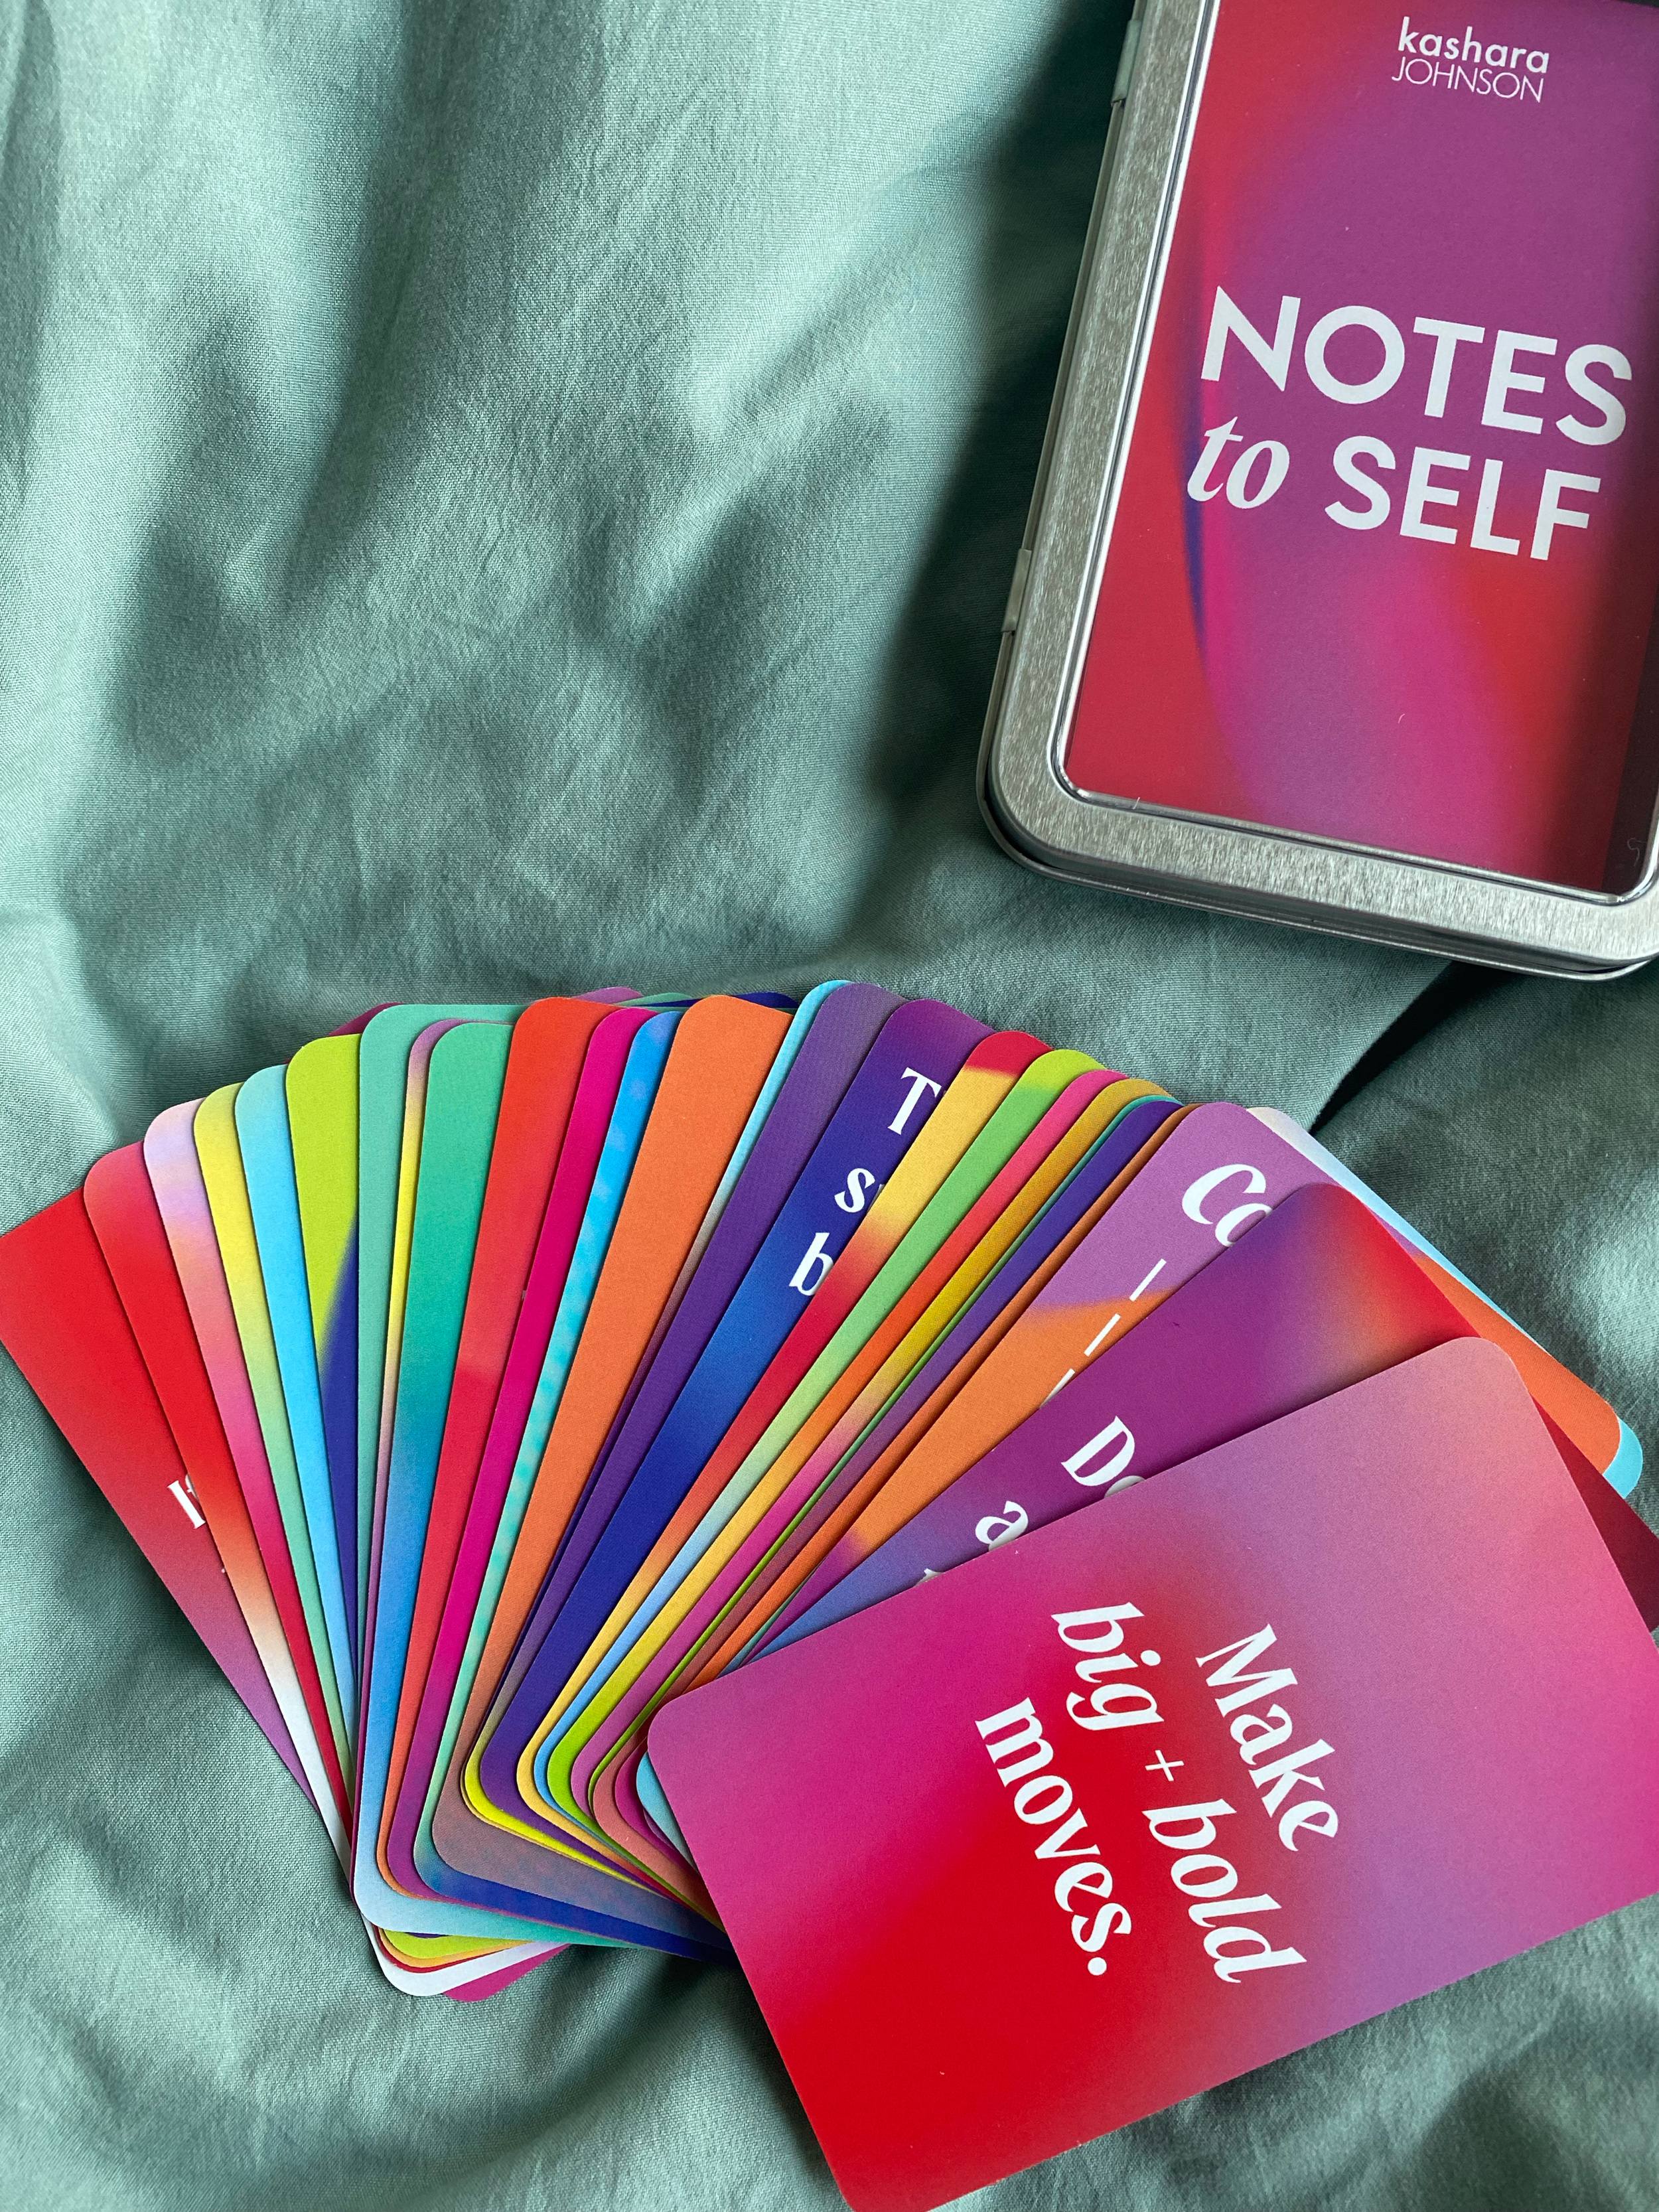 Notes to Self Affirmation Deck